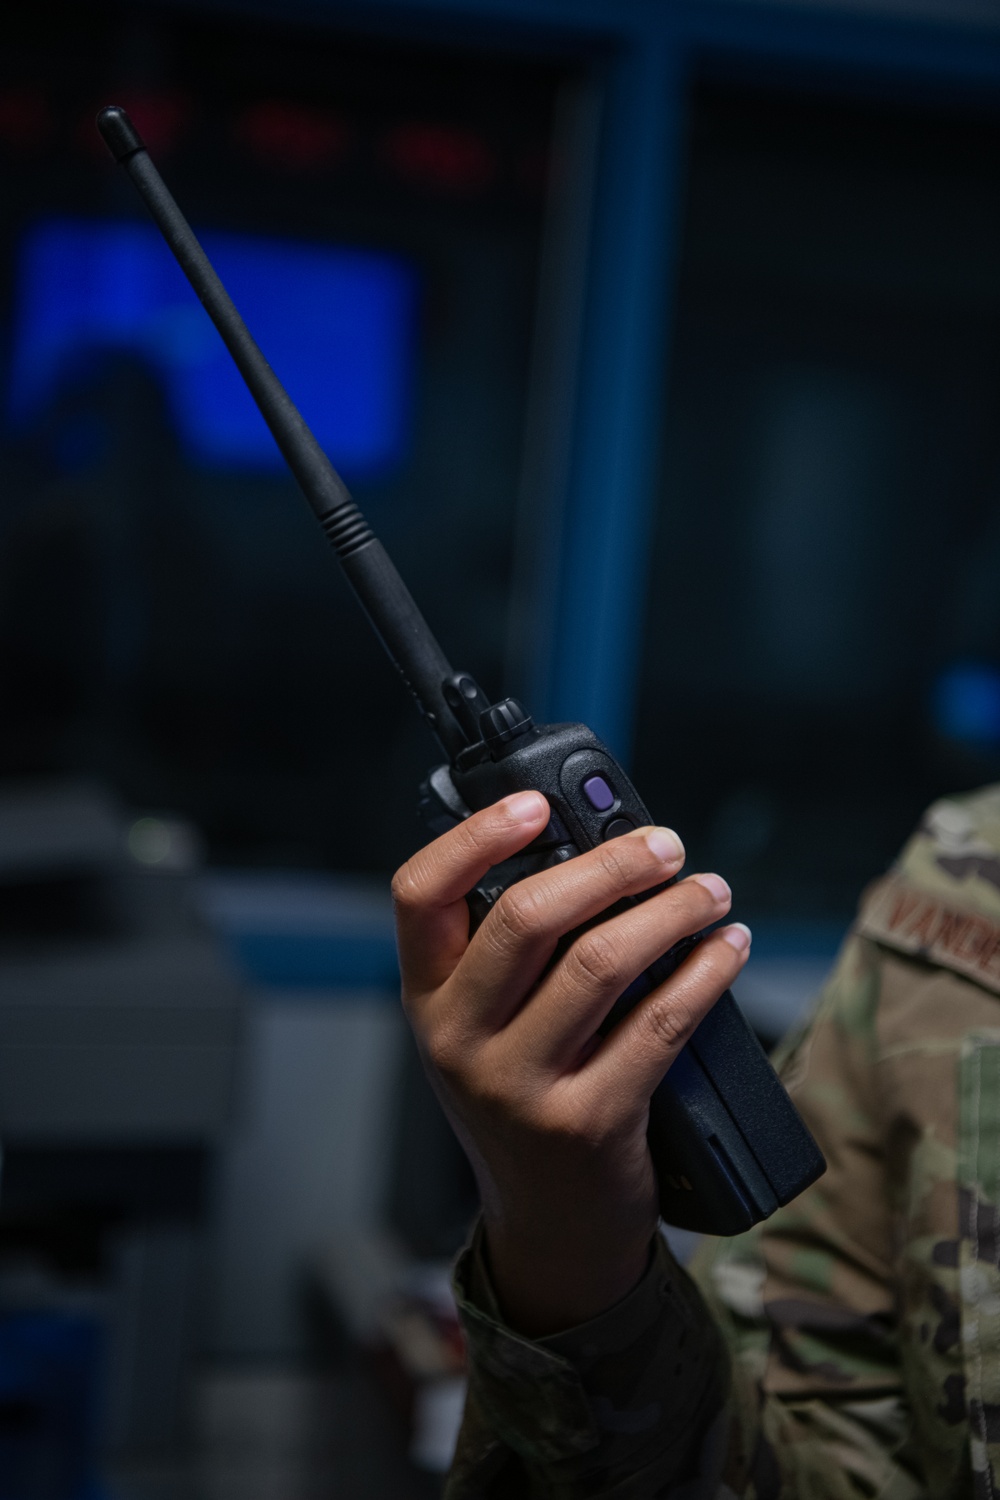 Staff Sgt. Lesley VanderWoude Uses the Radio at the 110th Wing